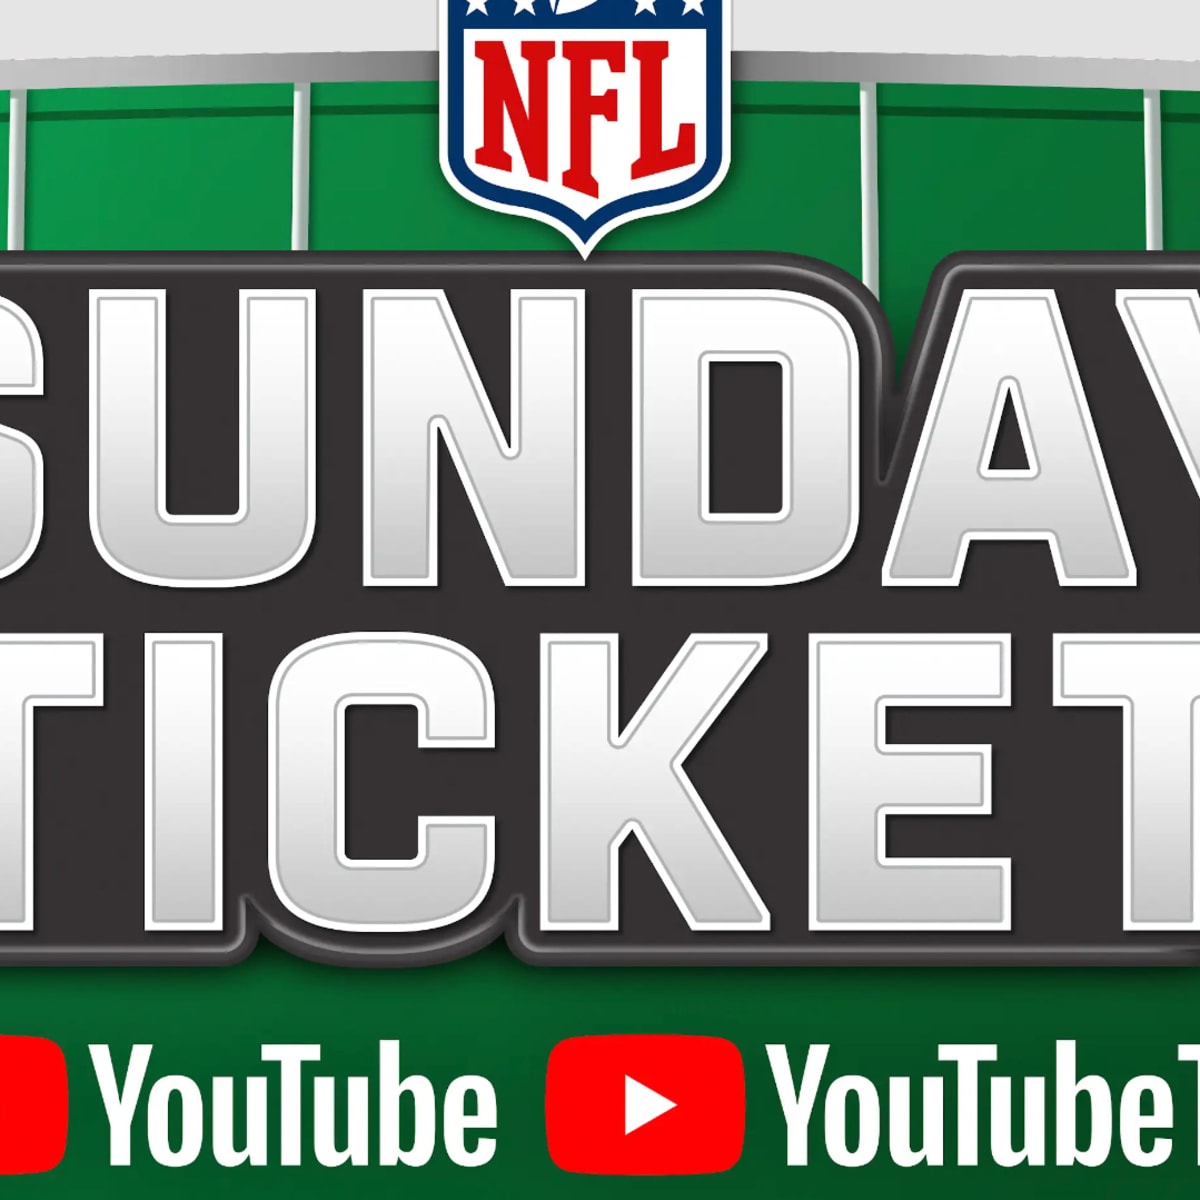 NFL Sunday Ticket on YouTube will present challenge for viewers